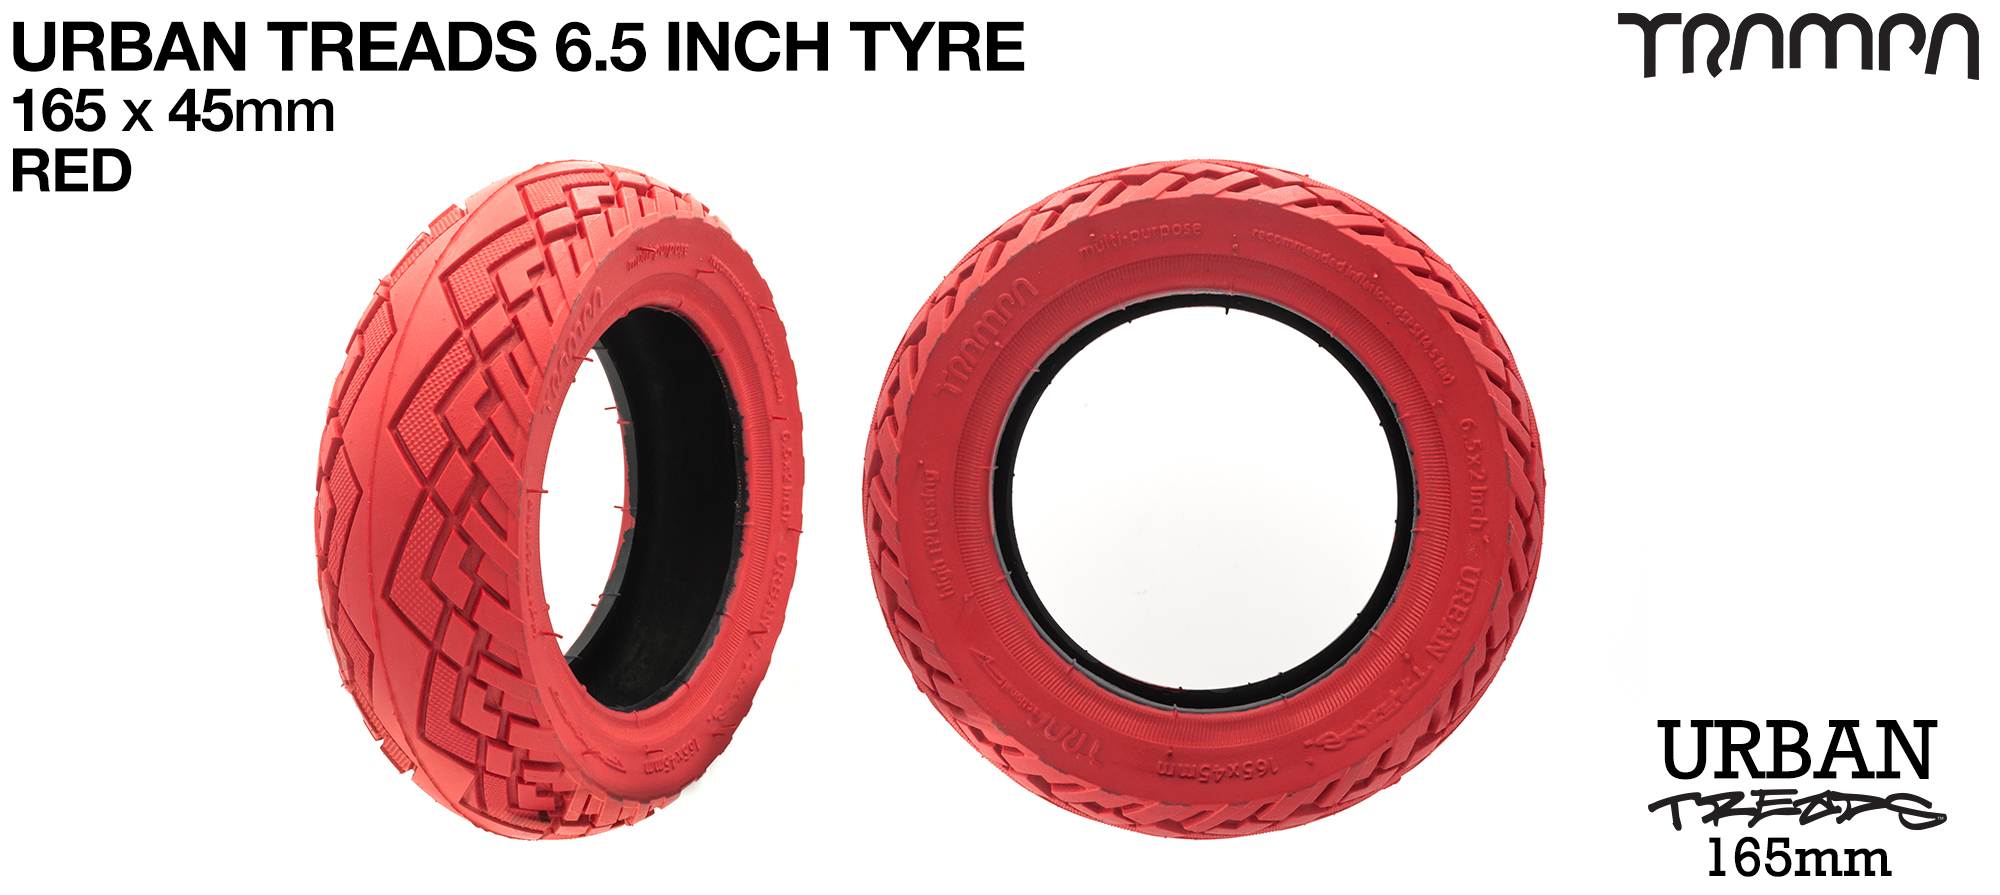 6 Inch URBAN Treads Tyre - RED 